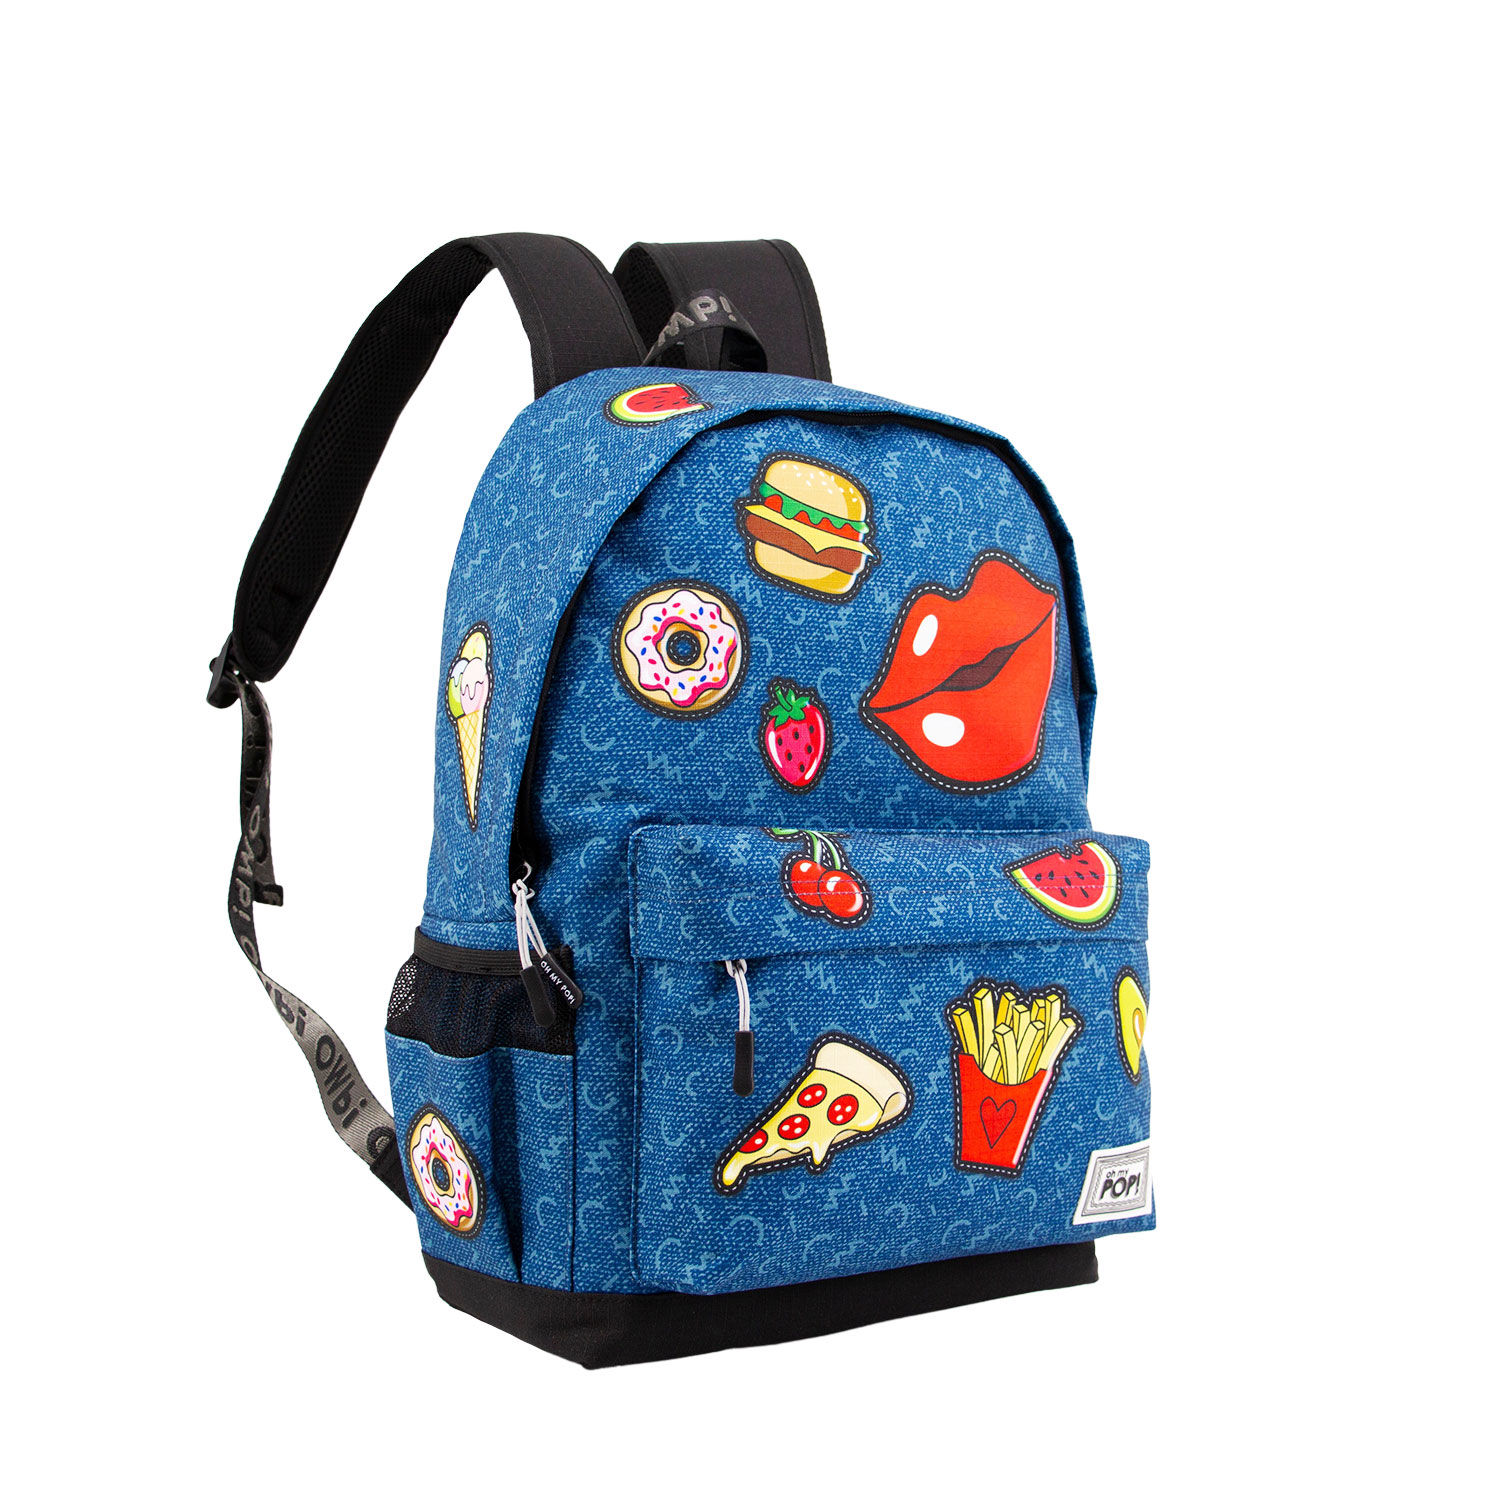 HS Backpack 1.3 Oh My Pop! Patches